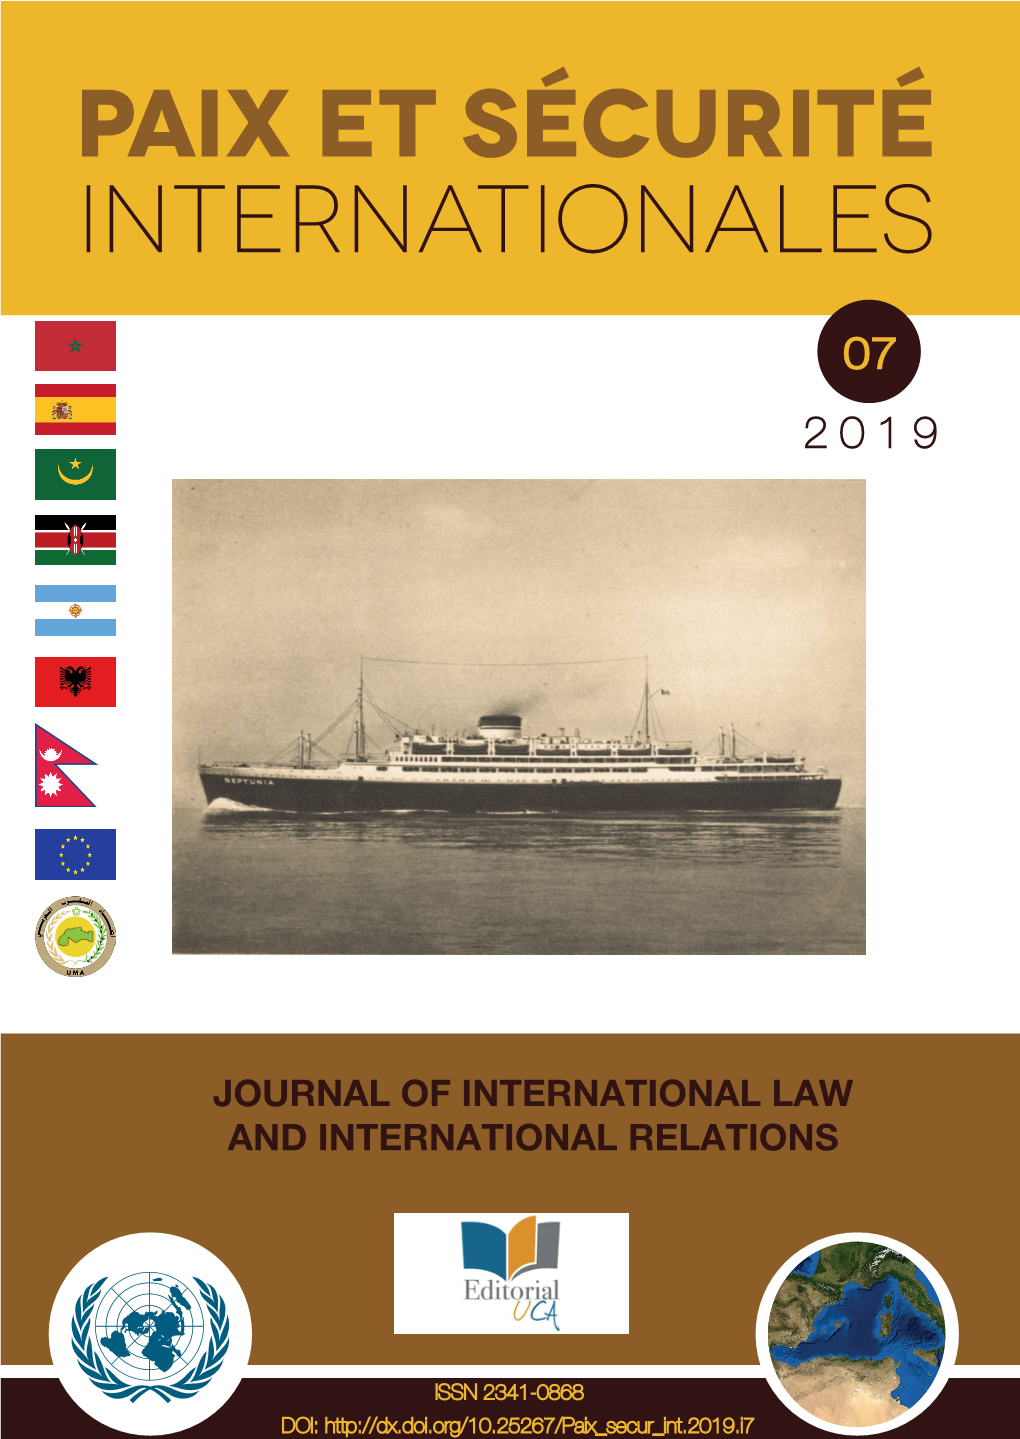 Journal of International Law and International Relations